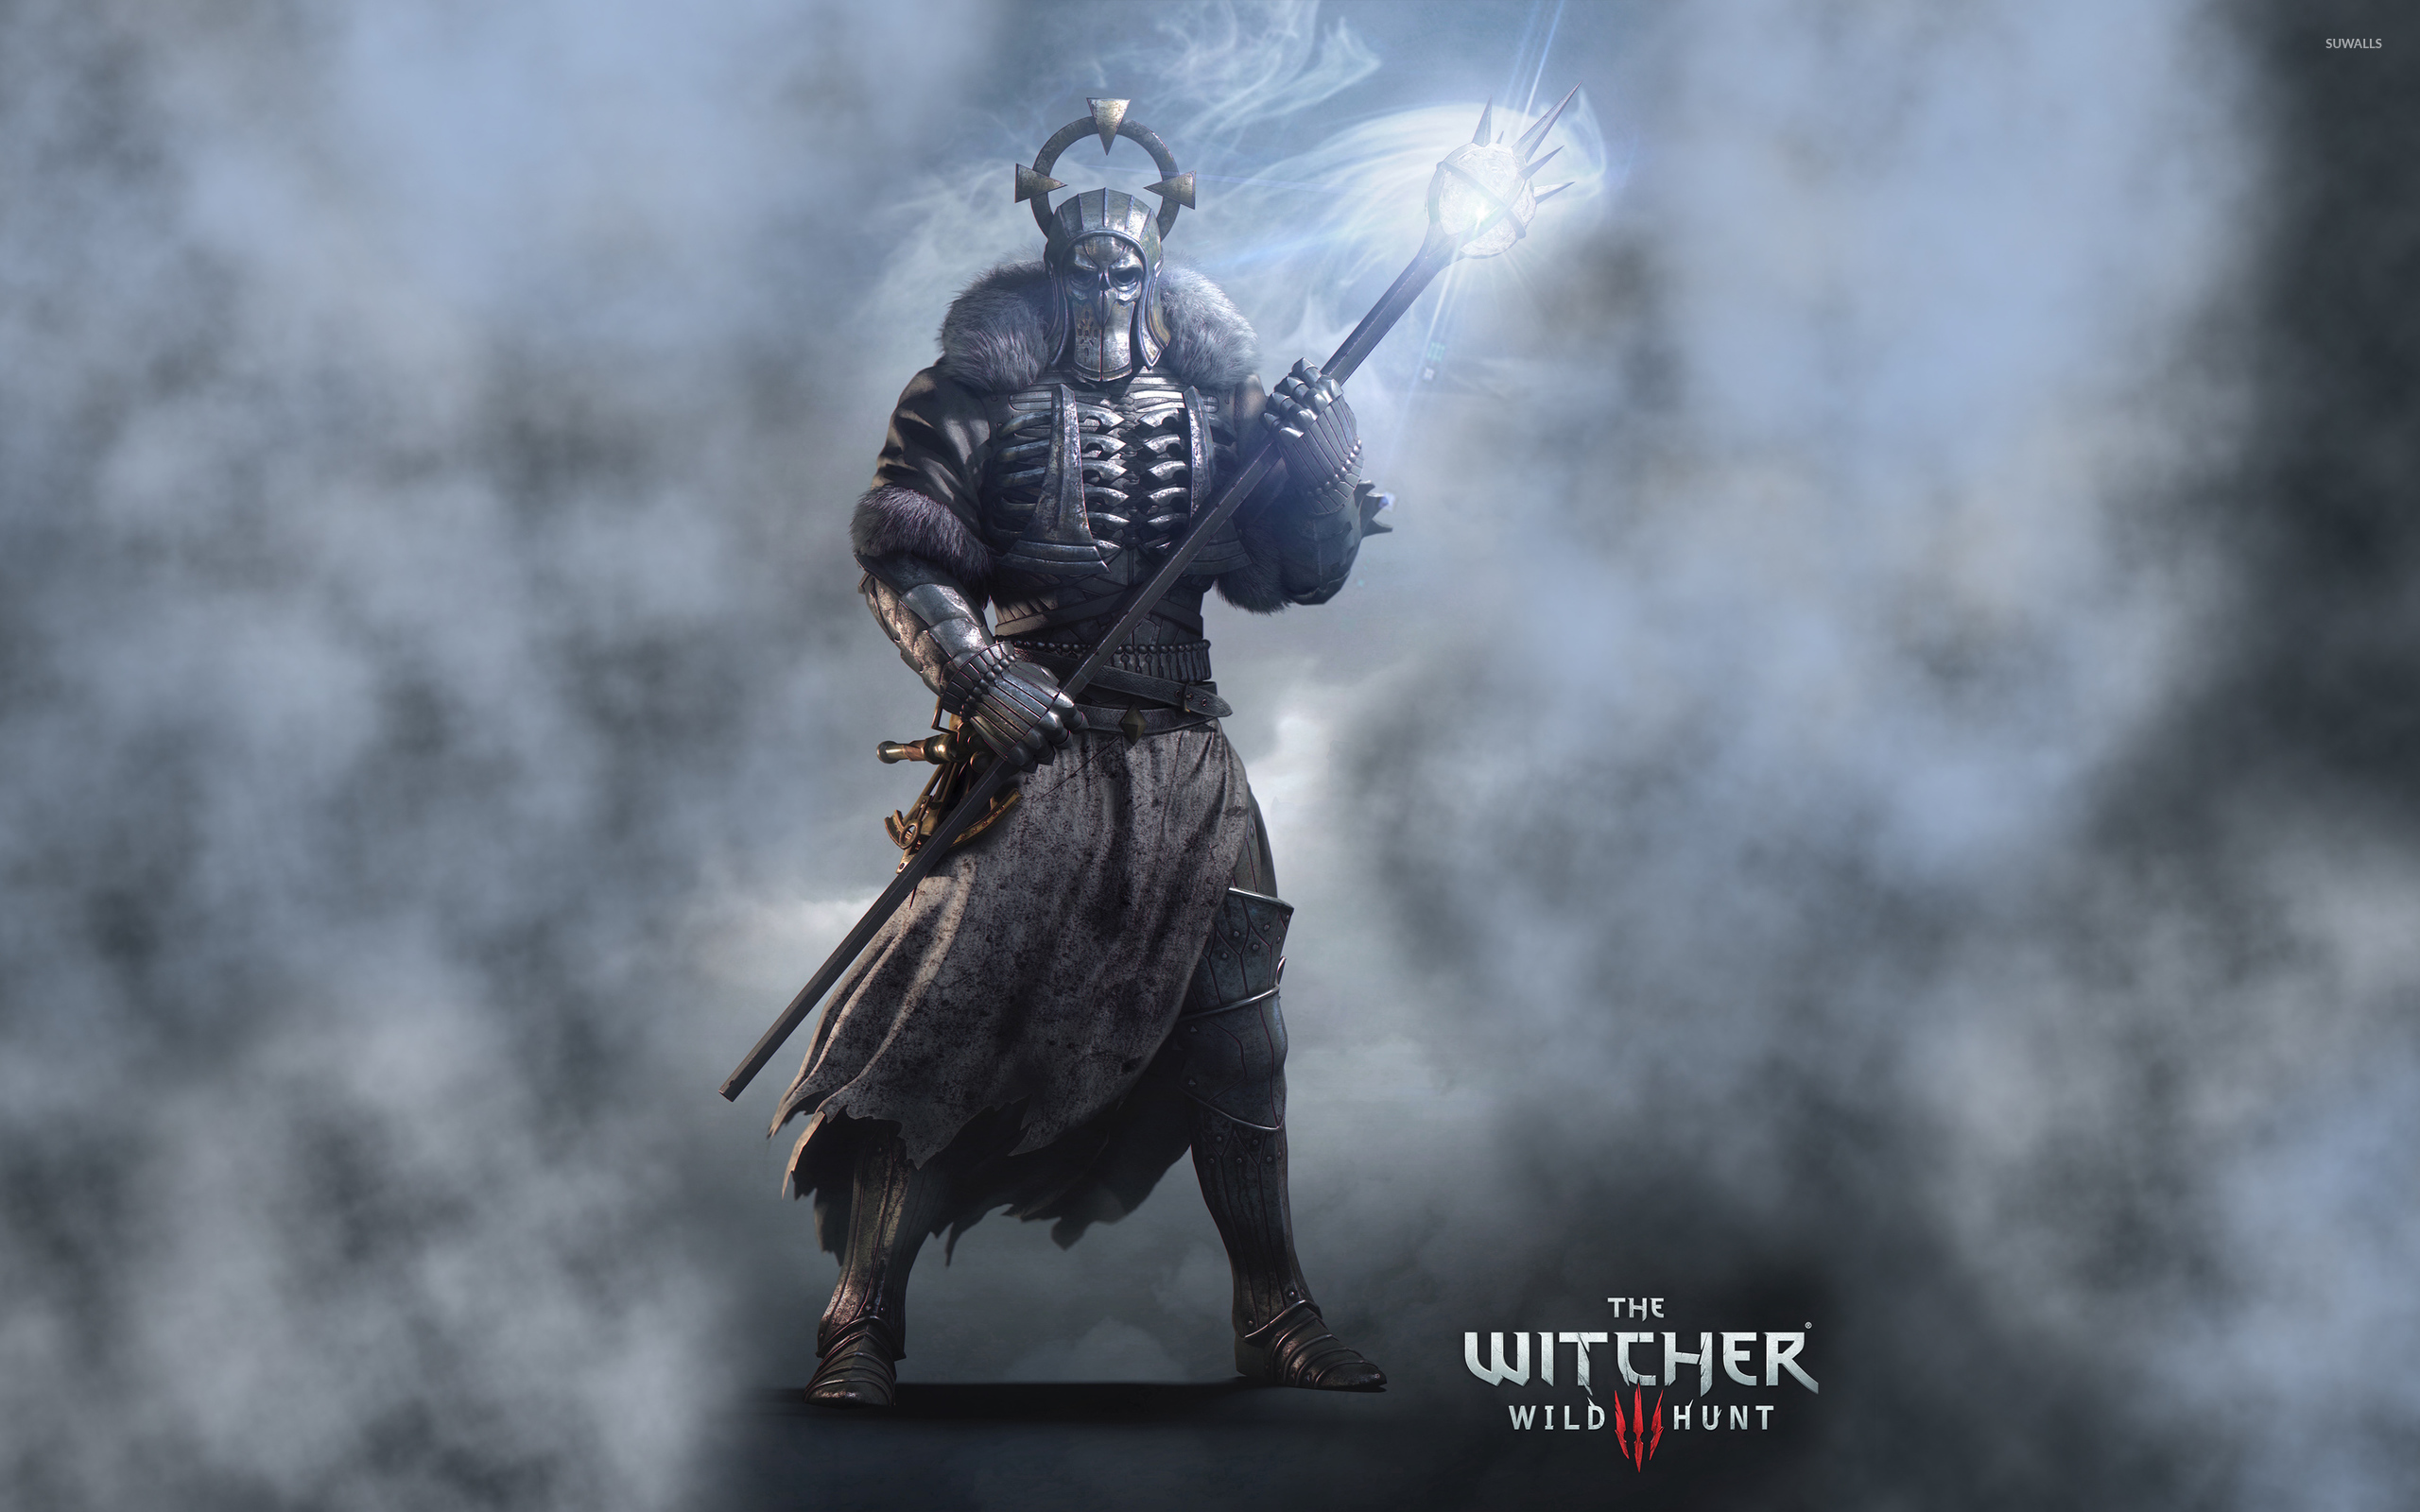    The Witcher 3 Wild Hunt wallpaper   Game wallpapers   49468 2560x1600